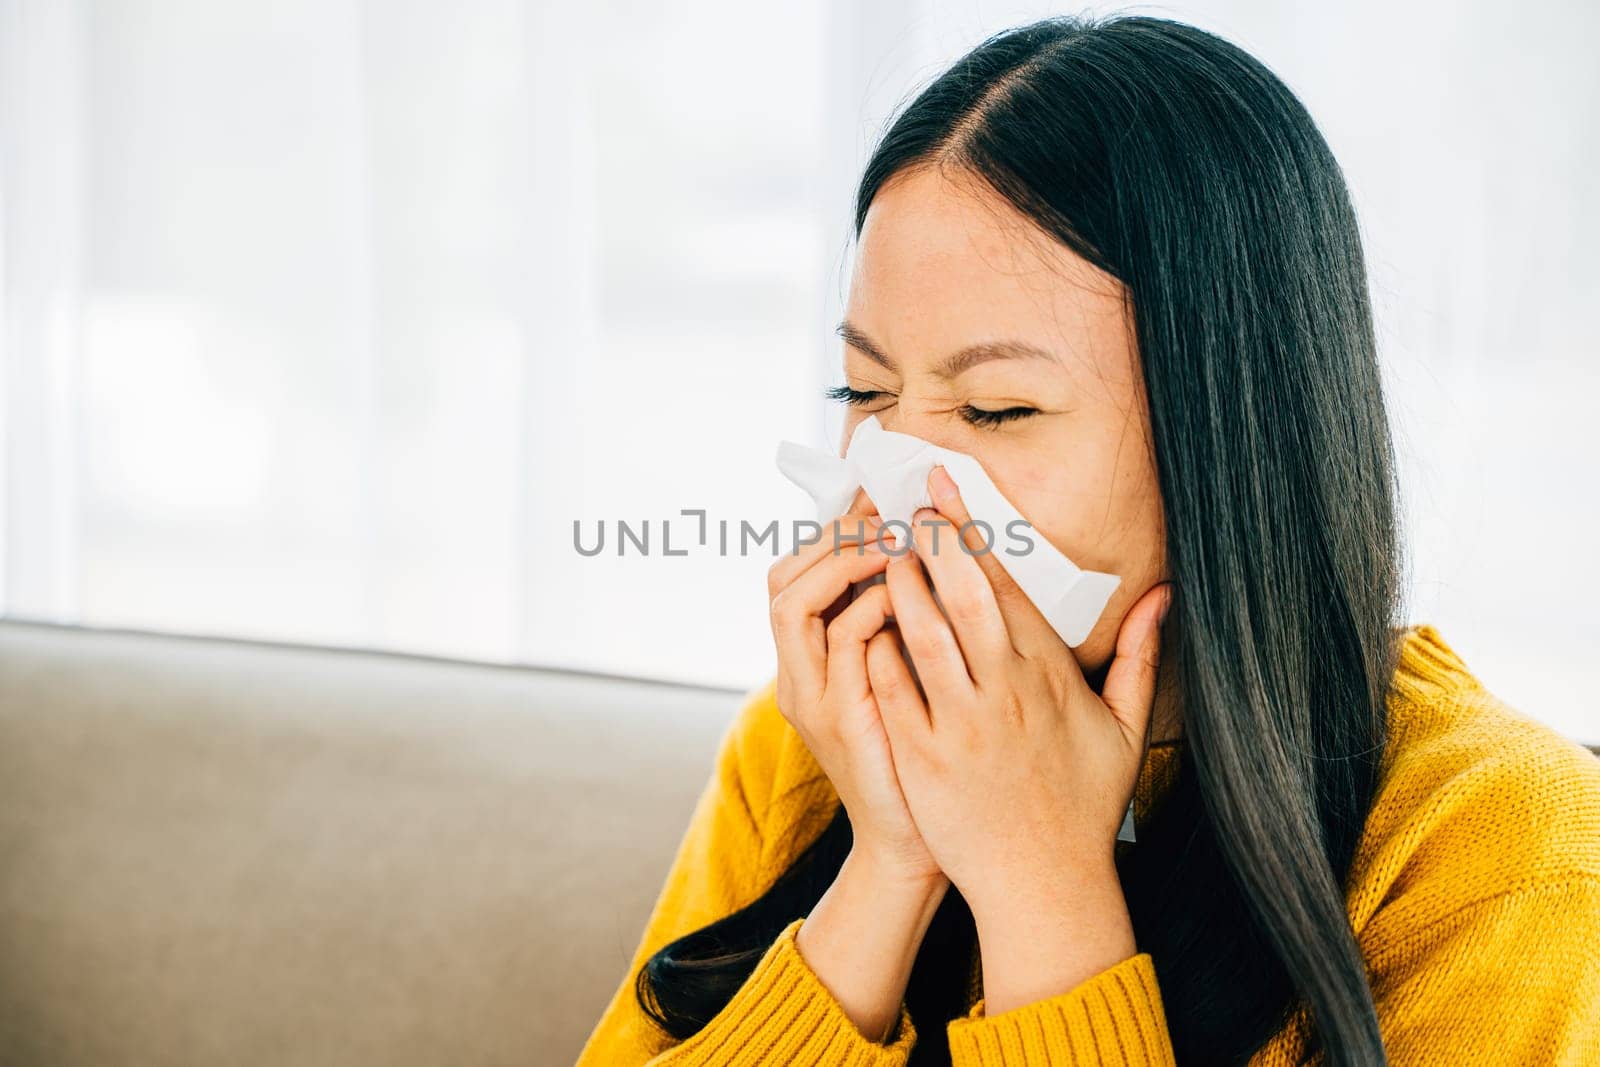 Portrait of an Asian woman in the living room holding a tissue dealing with cold symptoms like cough and sneezing. A patient at home managing flu. Snot and handkerchief in hand.